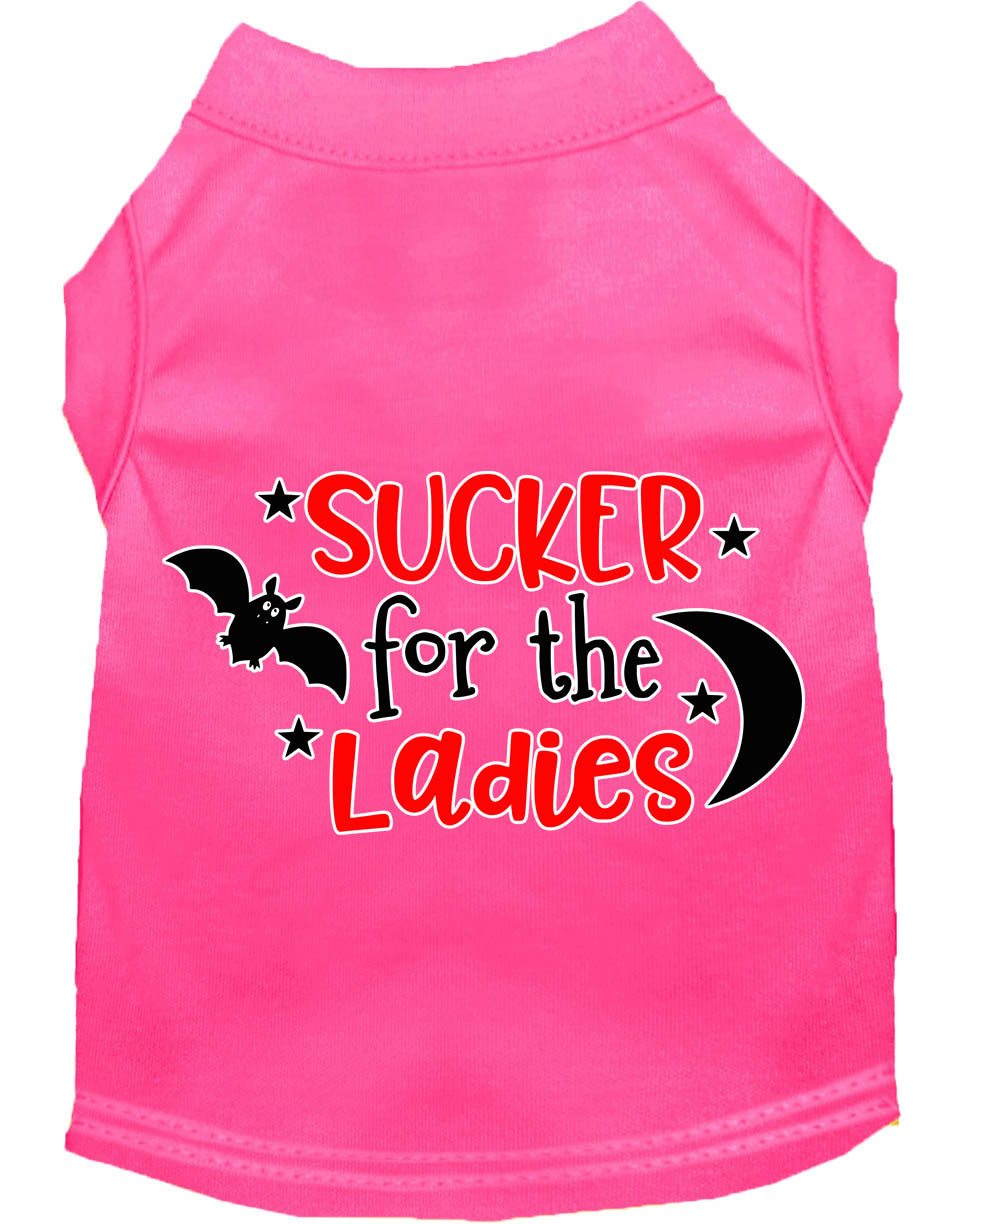 Sucker for the Ladies Screen Print Dog Shirt Bright Pink XS